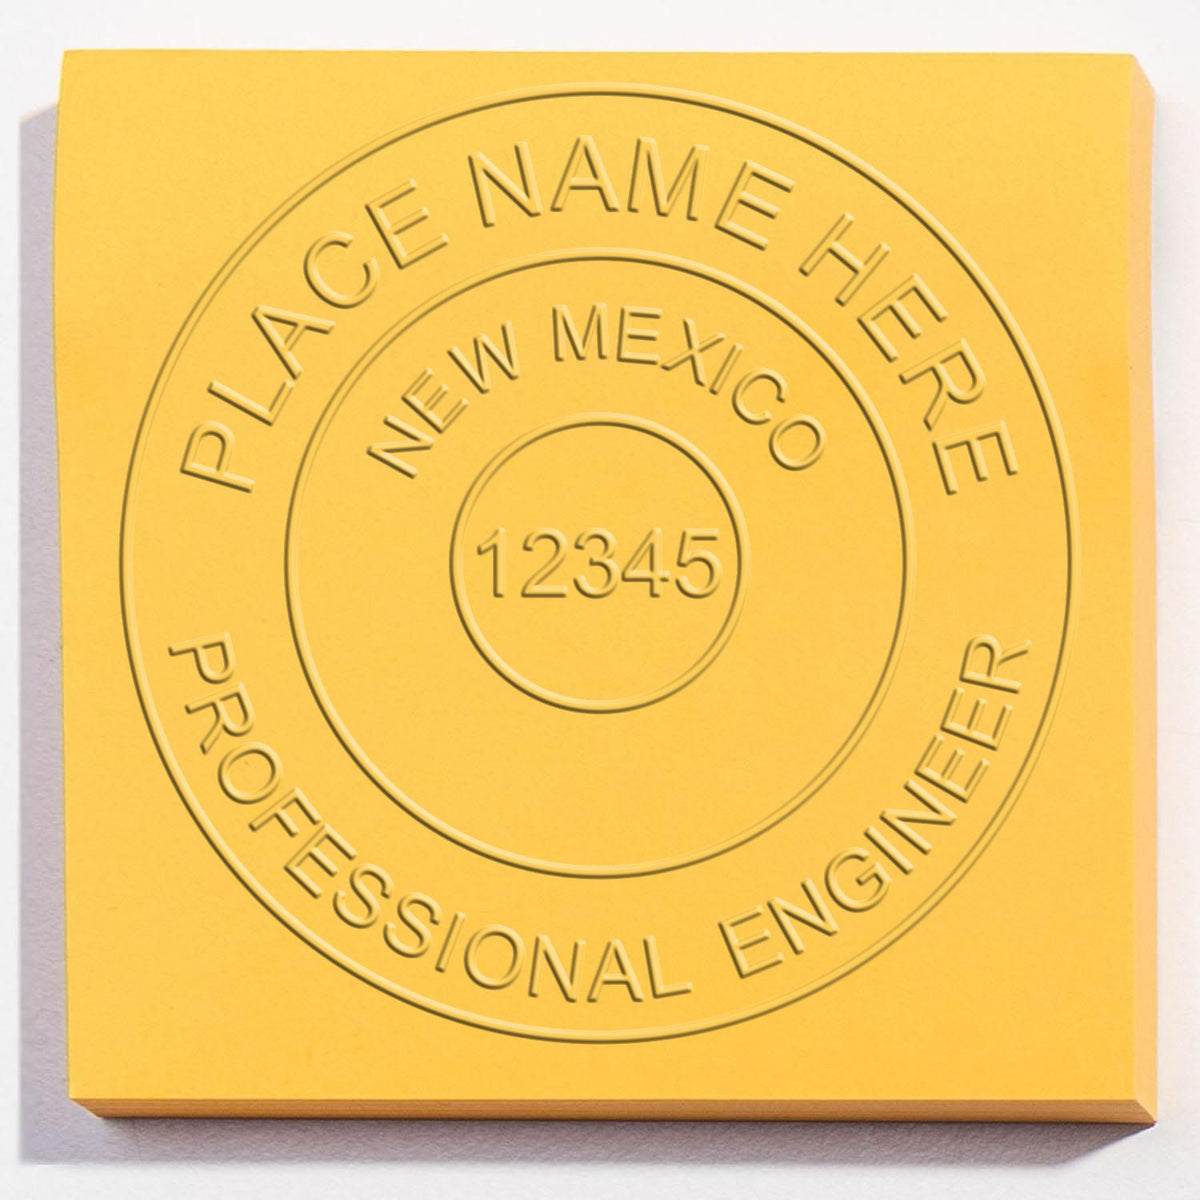 An alternative view of the State of New Mexico Extended Long Reach Engineer Seal stamped on a sheet of paper showing the image in use